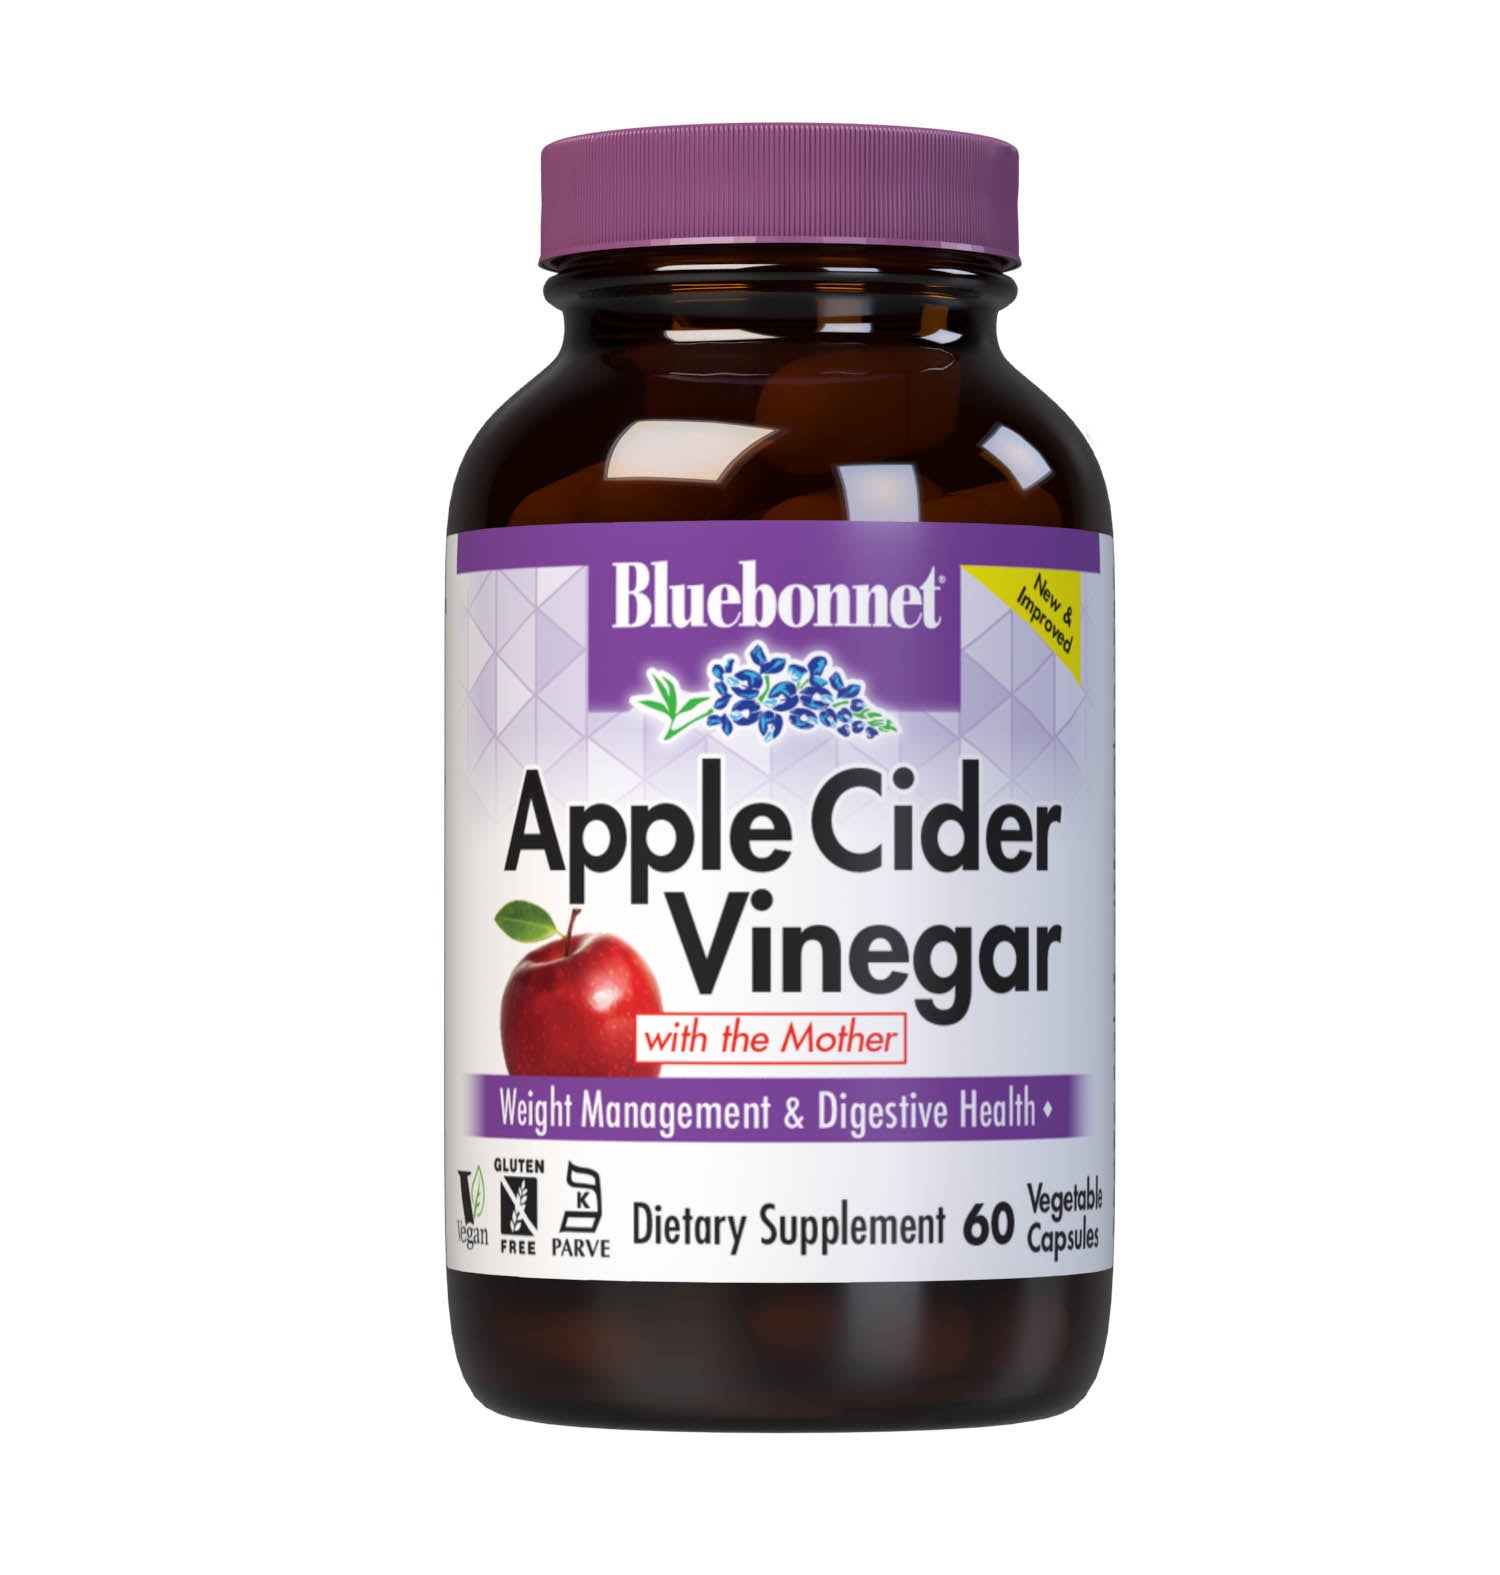 Bluebonnet’s Apple Cider Vinegar with the Mother 60 Vegetable Capsules are carefully crafted from cold-pressed juice of organic apples, which has been fermented and standardized for acetic acid to support weight management and digestive health. #size_60 count